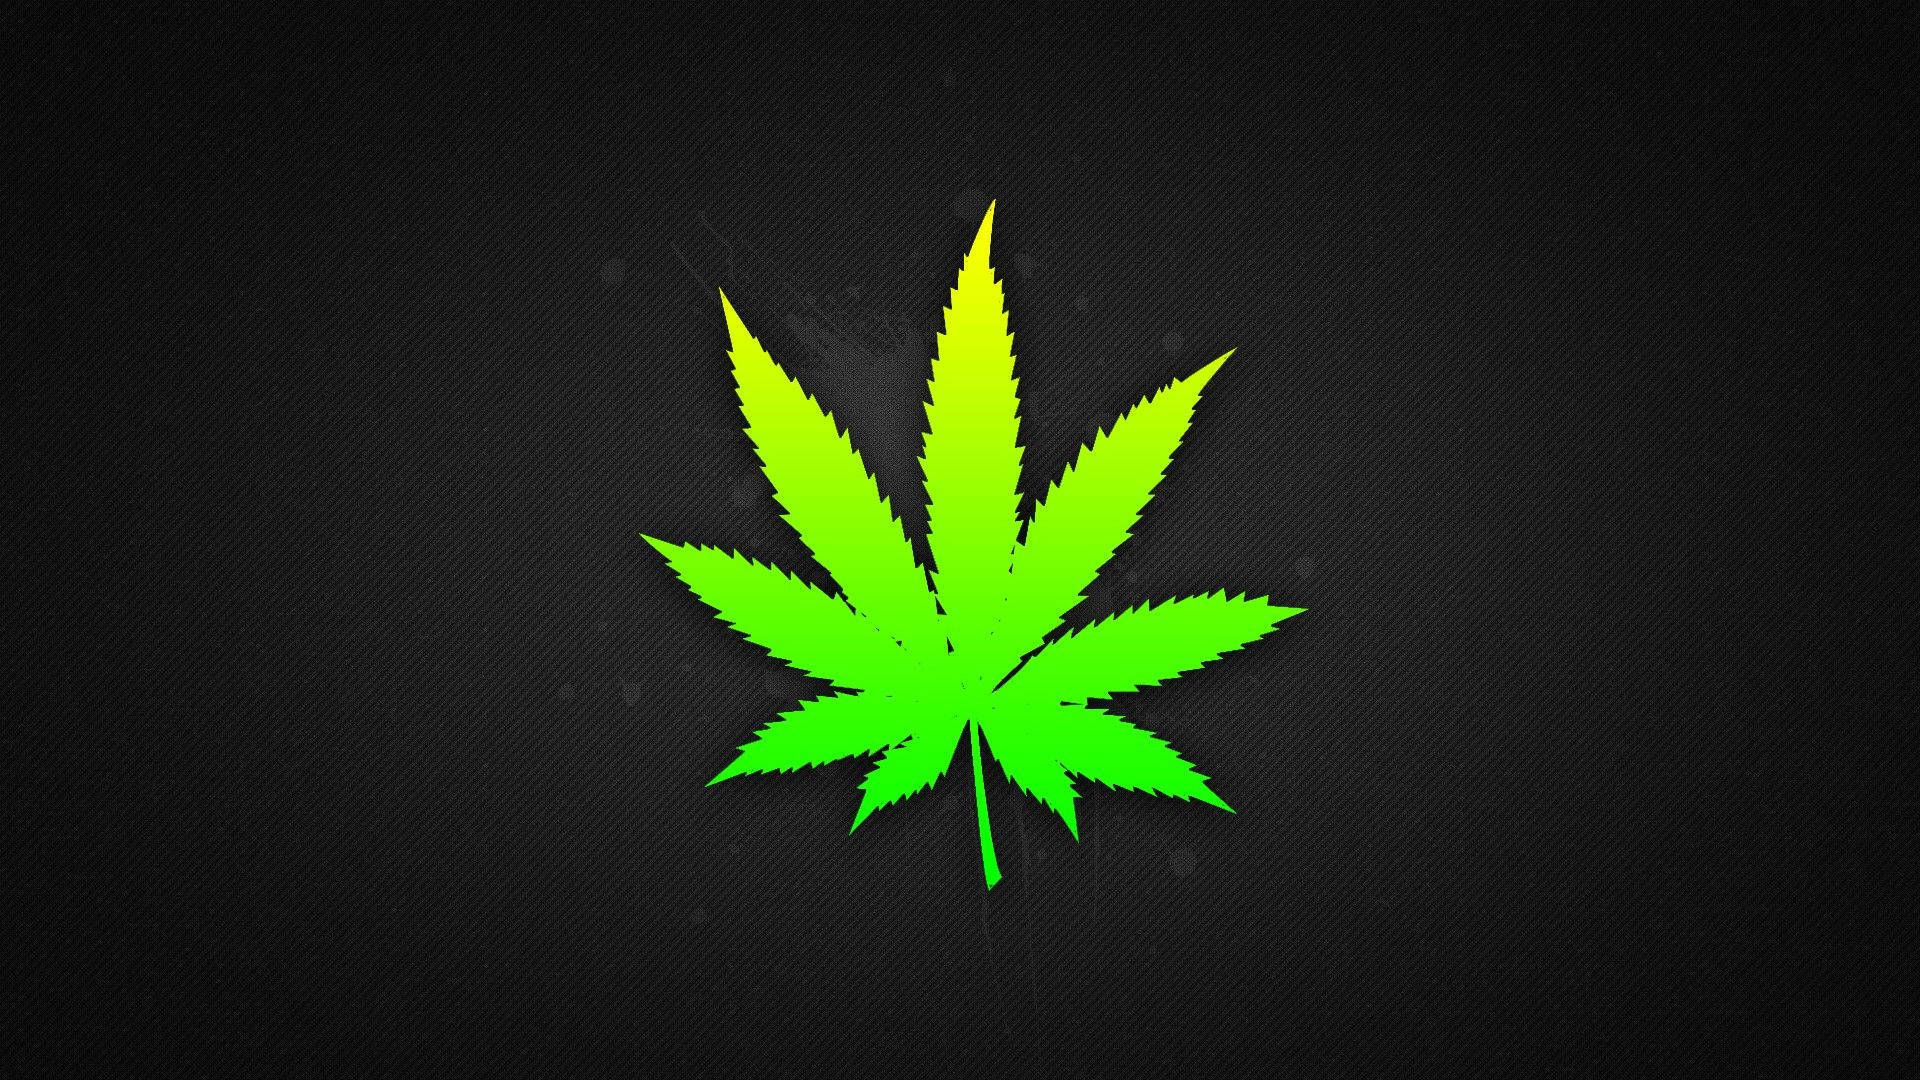 A Rick and Morty-inspired Weed Leaf Wallpaper